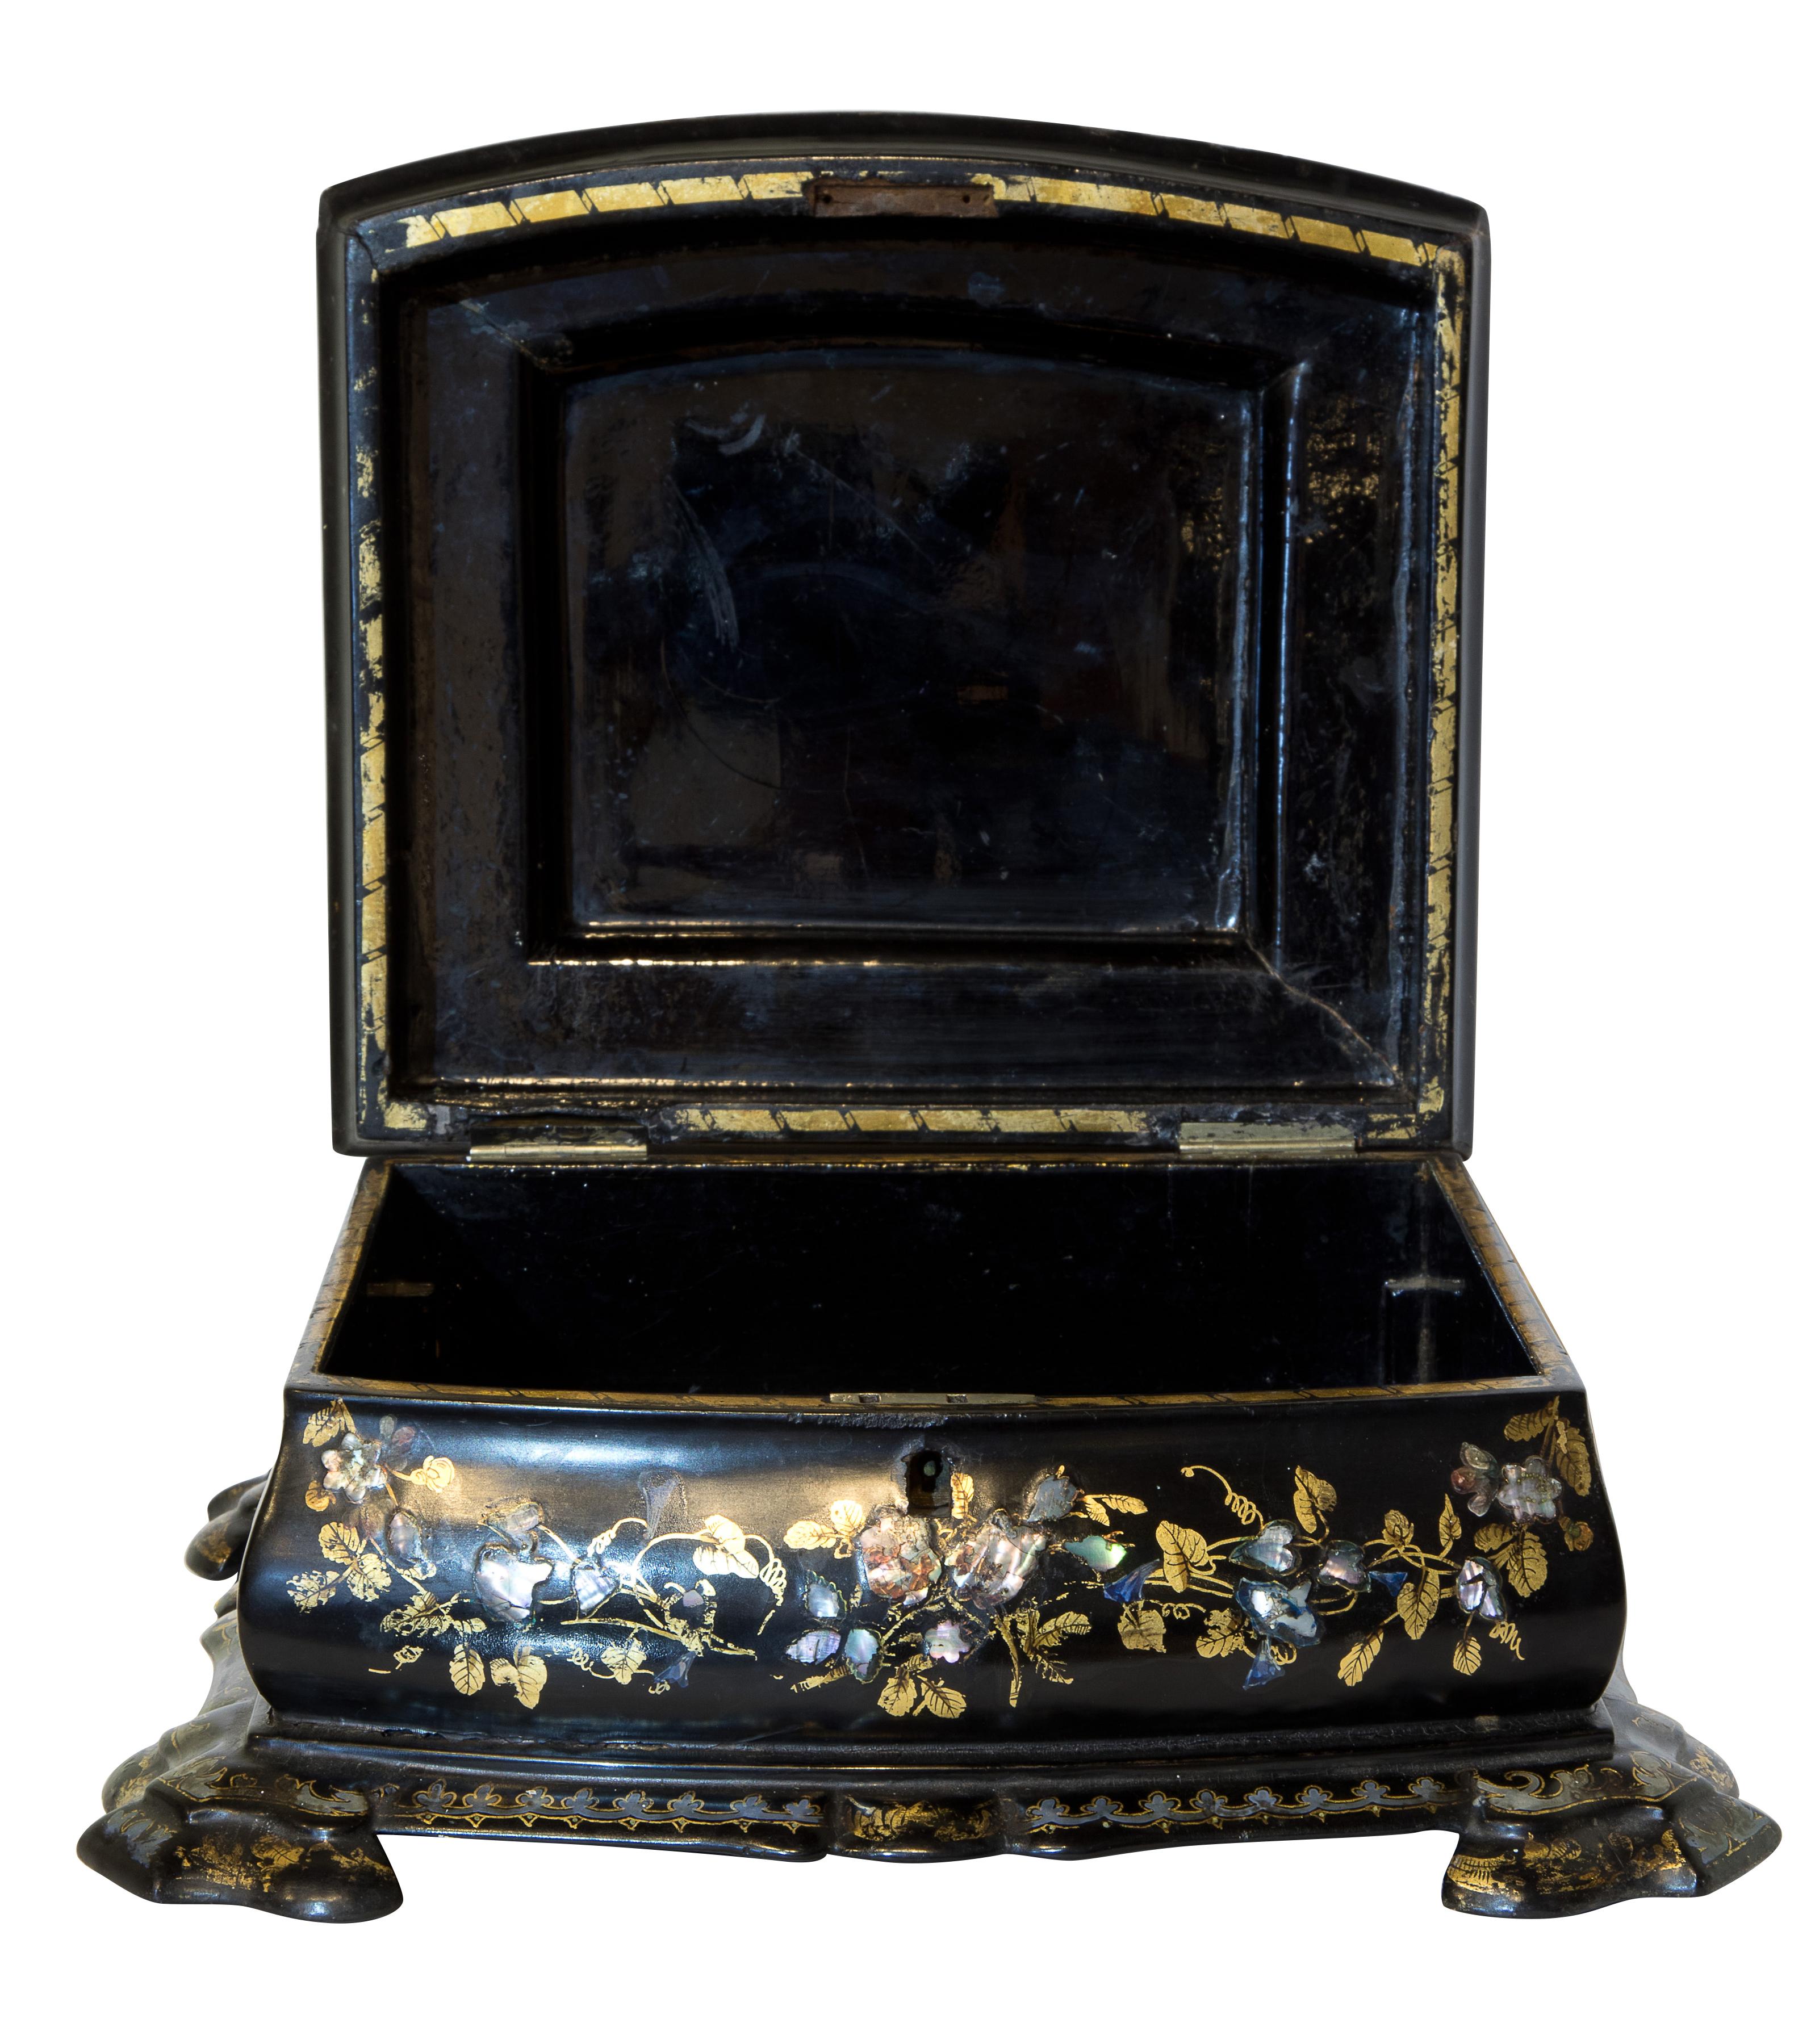 19th century papier mache / mother of pearl inlaid box.